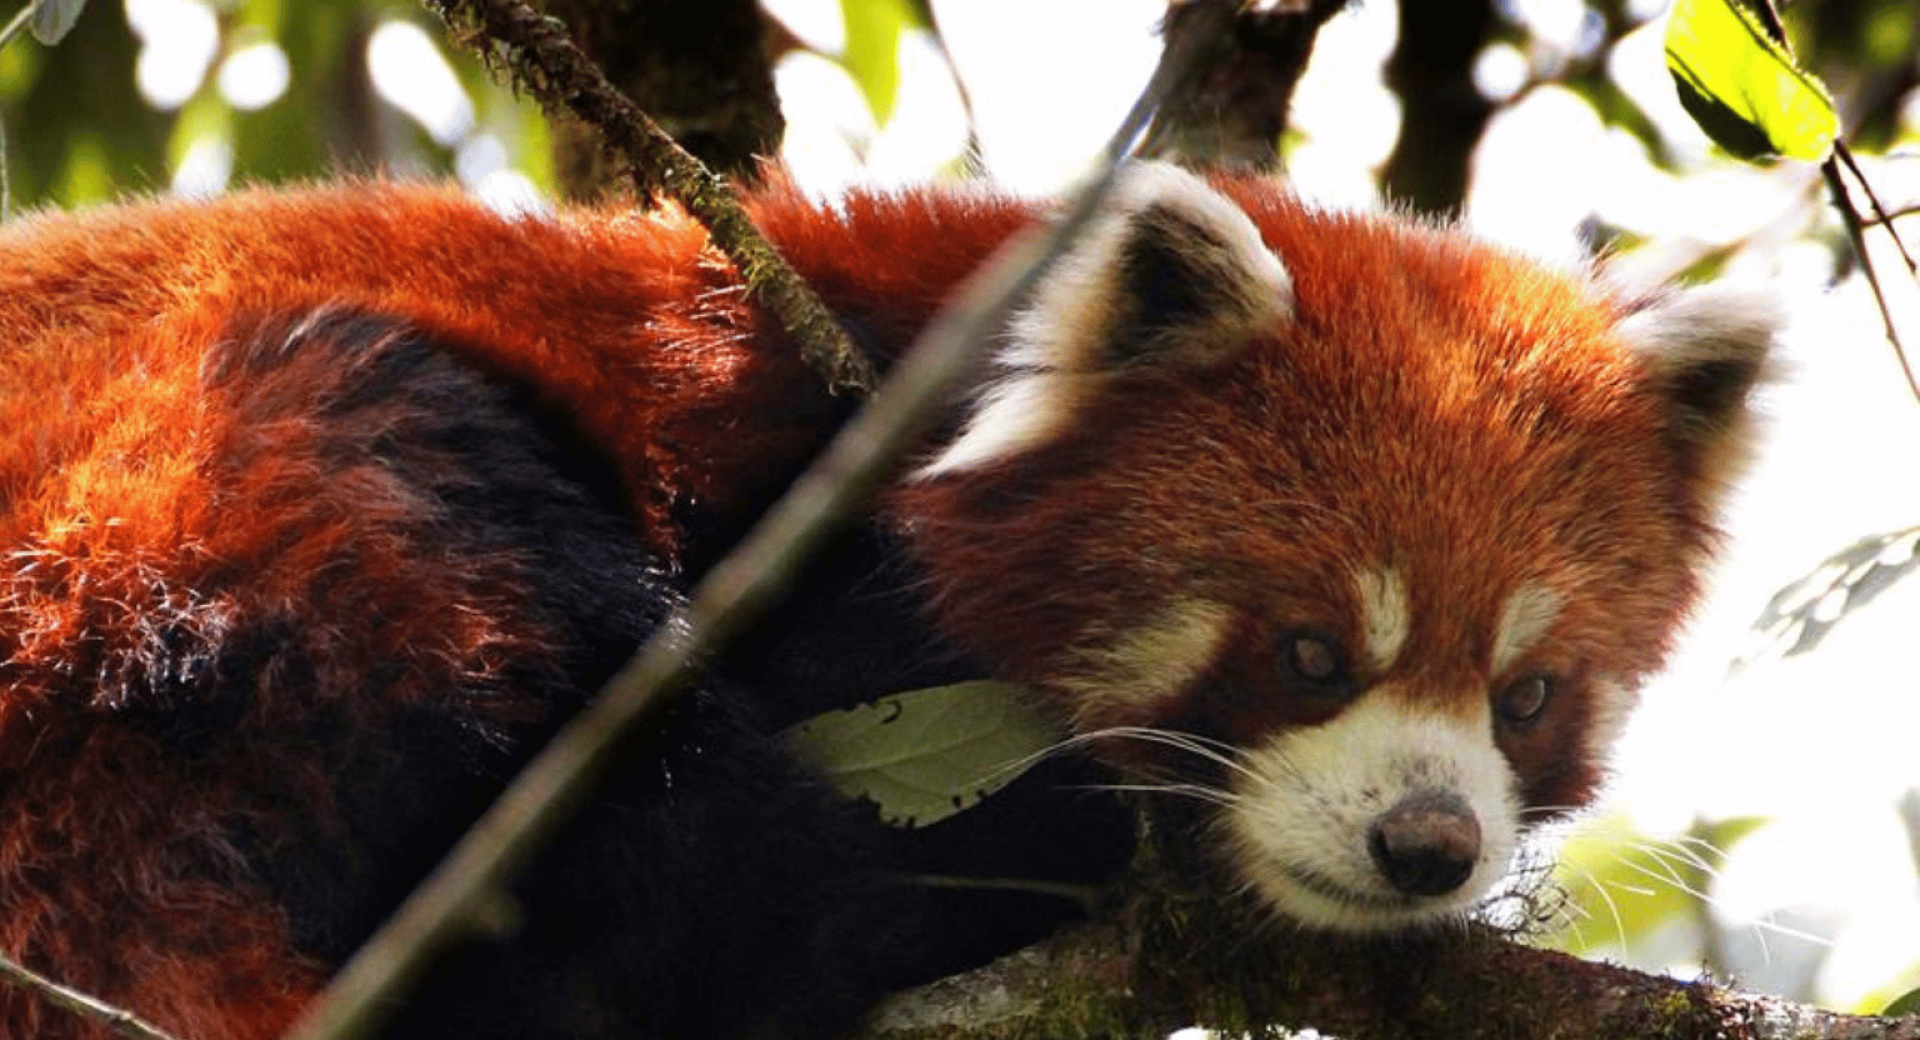 Press Release: A Center for Red Panda Conservation and Sustainable Living Opens on Earth Day